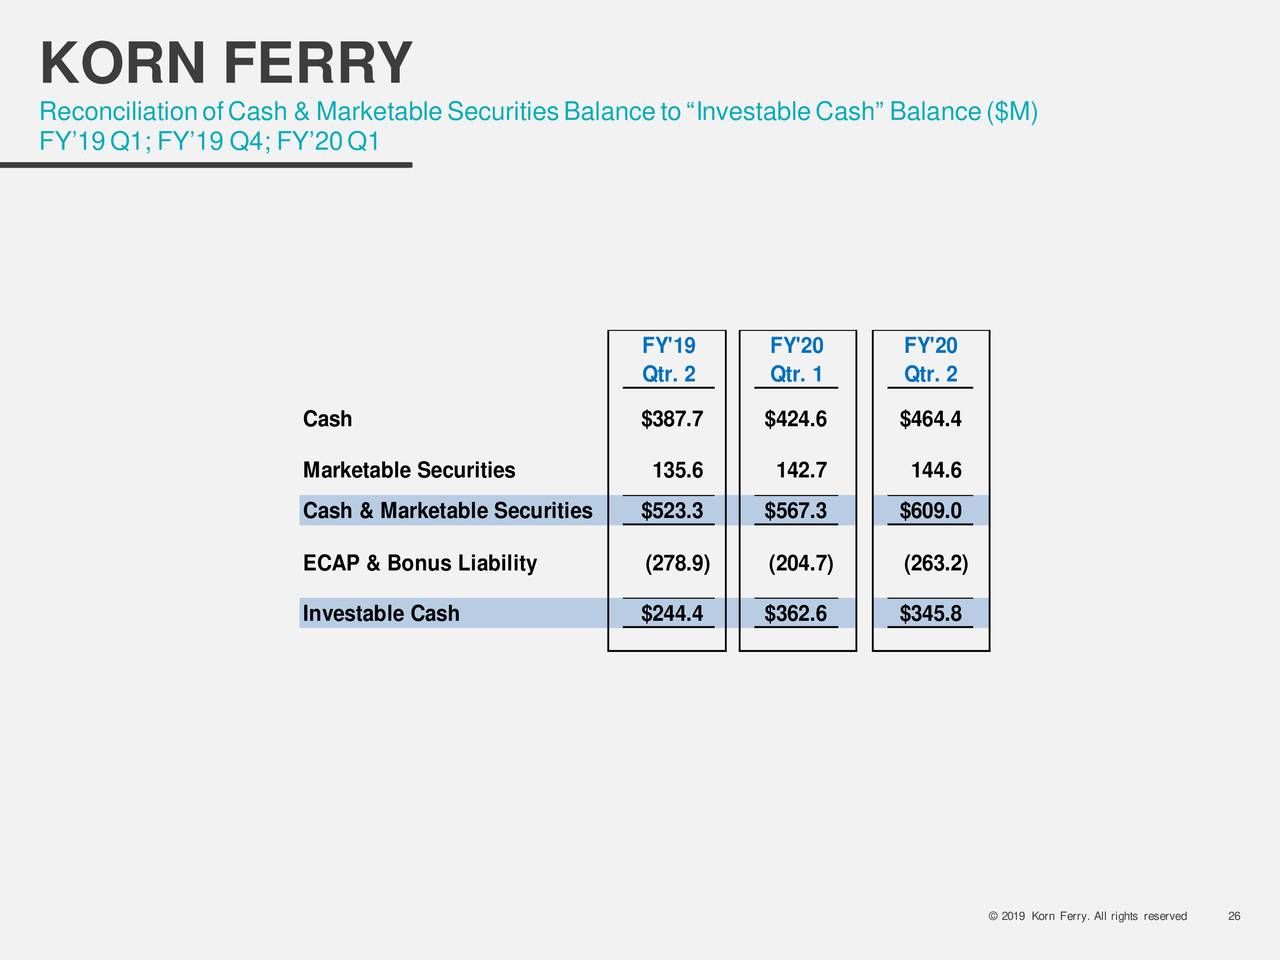 Korn Ferry 2020 Q2 Results Earnings Call Presentation (NYSE:KFY